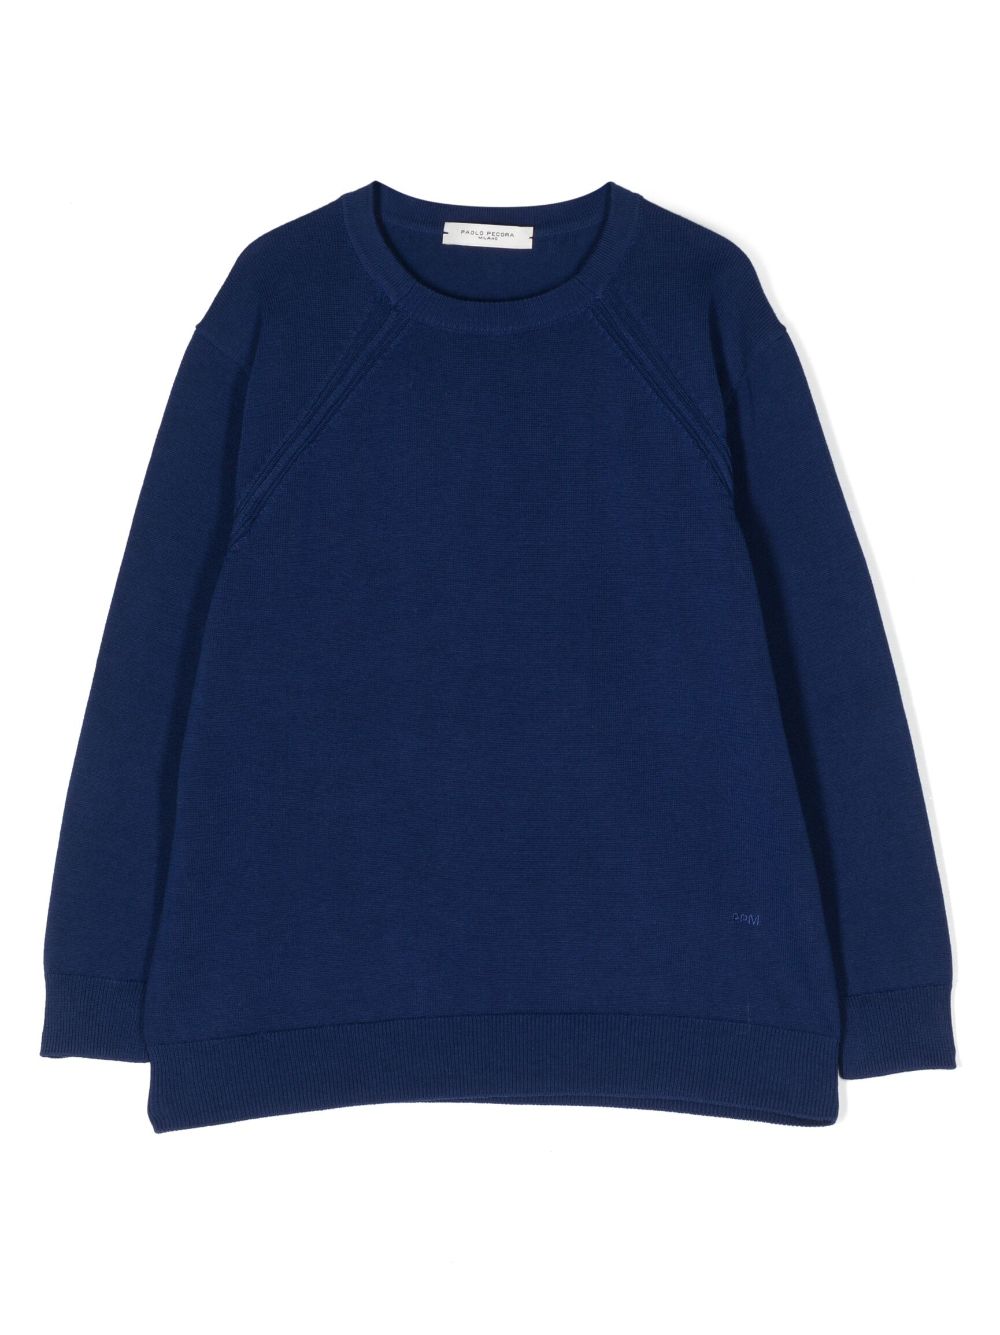 Paolo Pecora Kids logo-embroidered knitted jumper - Blue von Paolo Pecora Kids